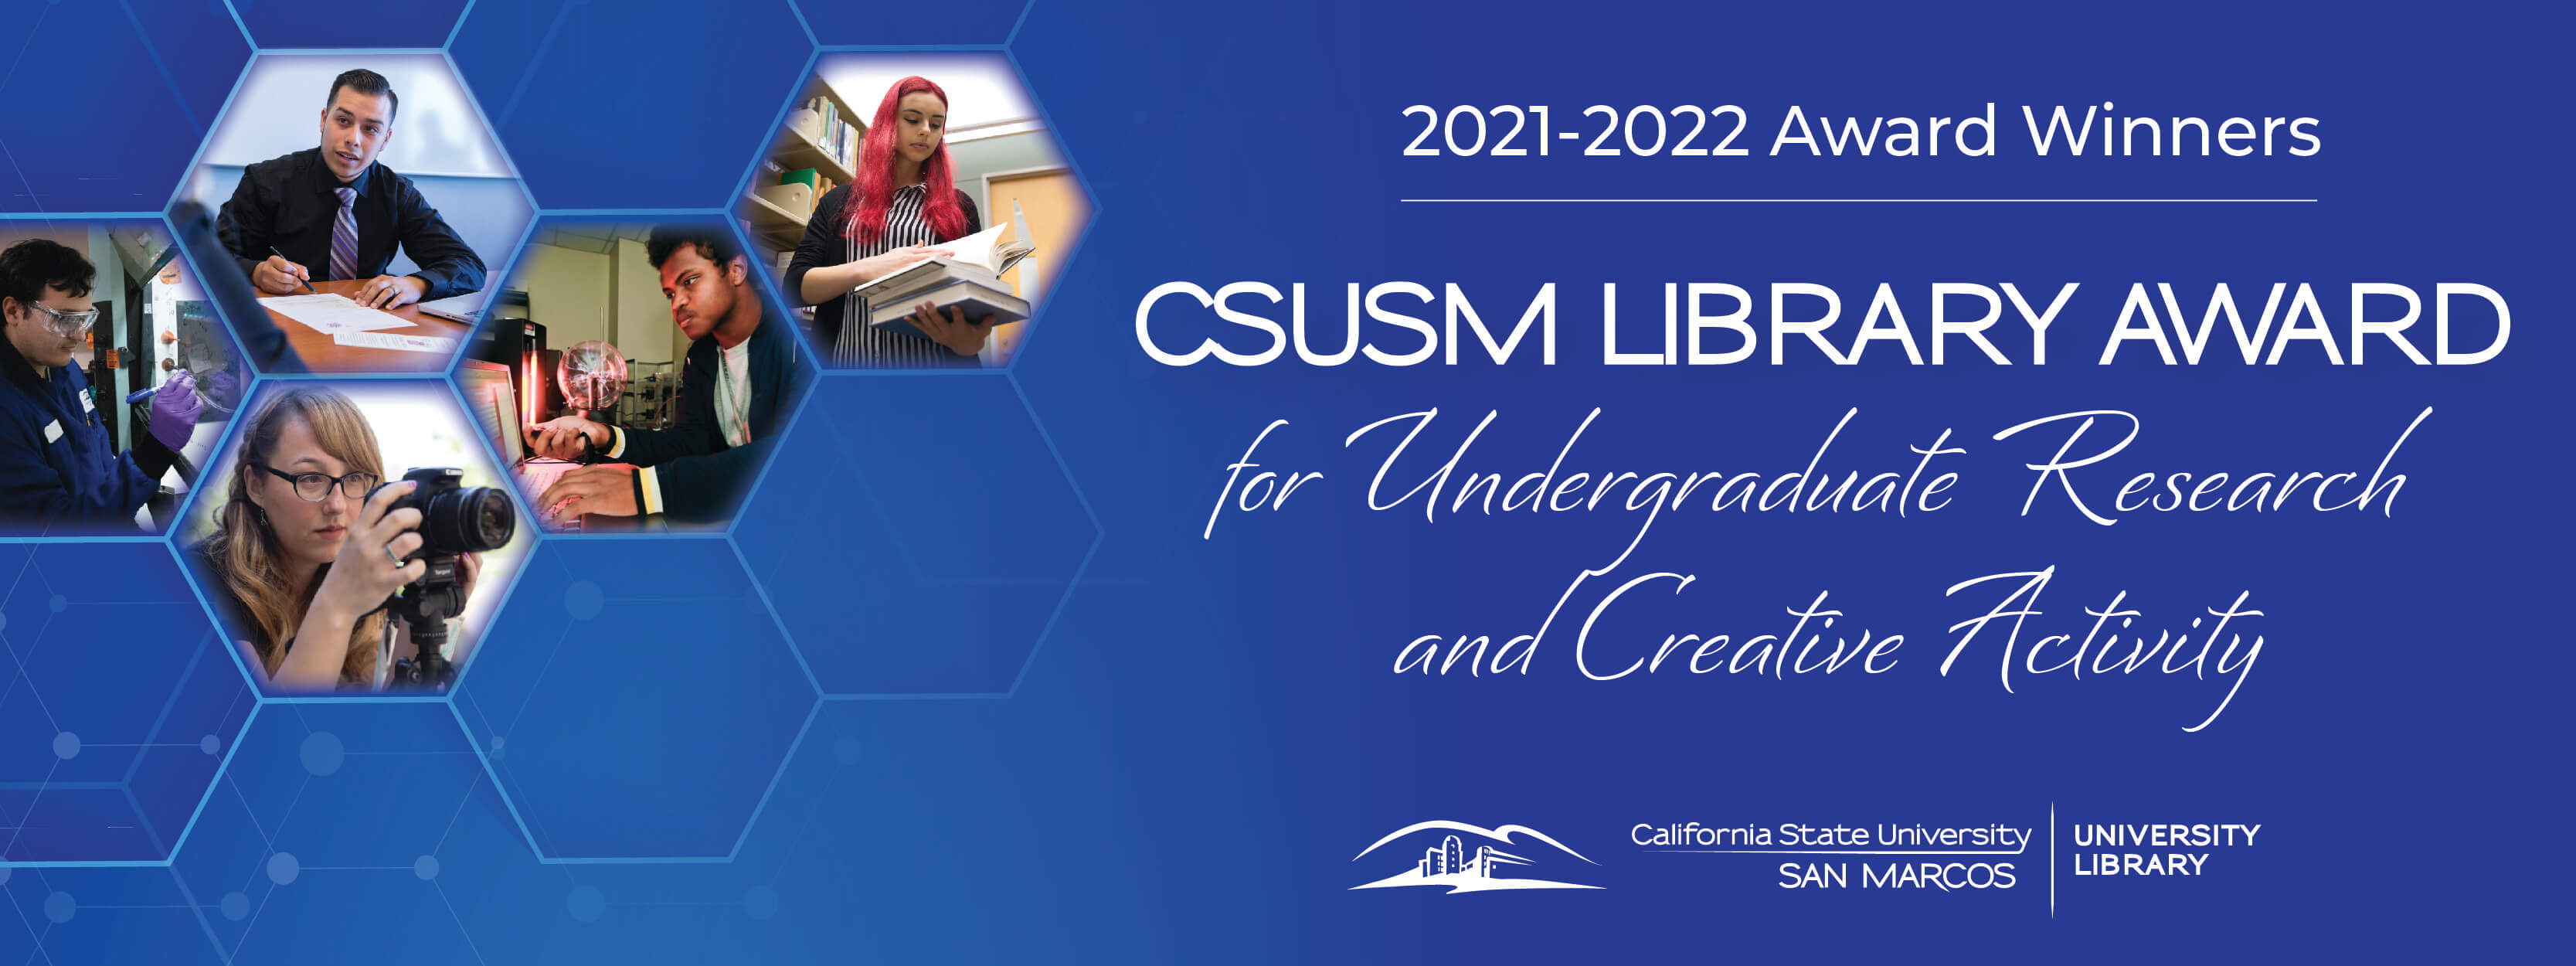 Image for the Spotlight on Winners of the 2021-2022 University Library Award for Undergraduate Research and Creative Activity